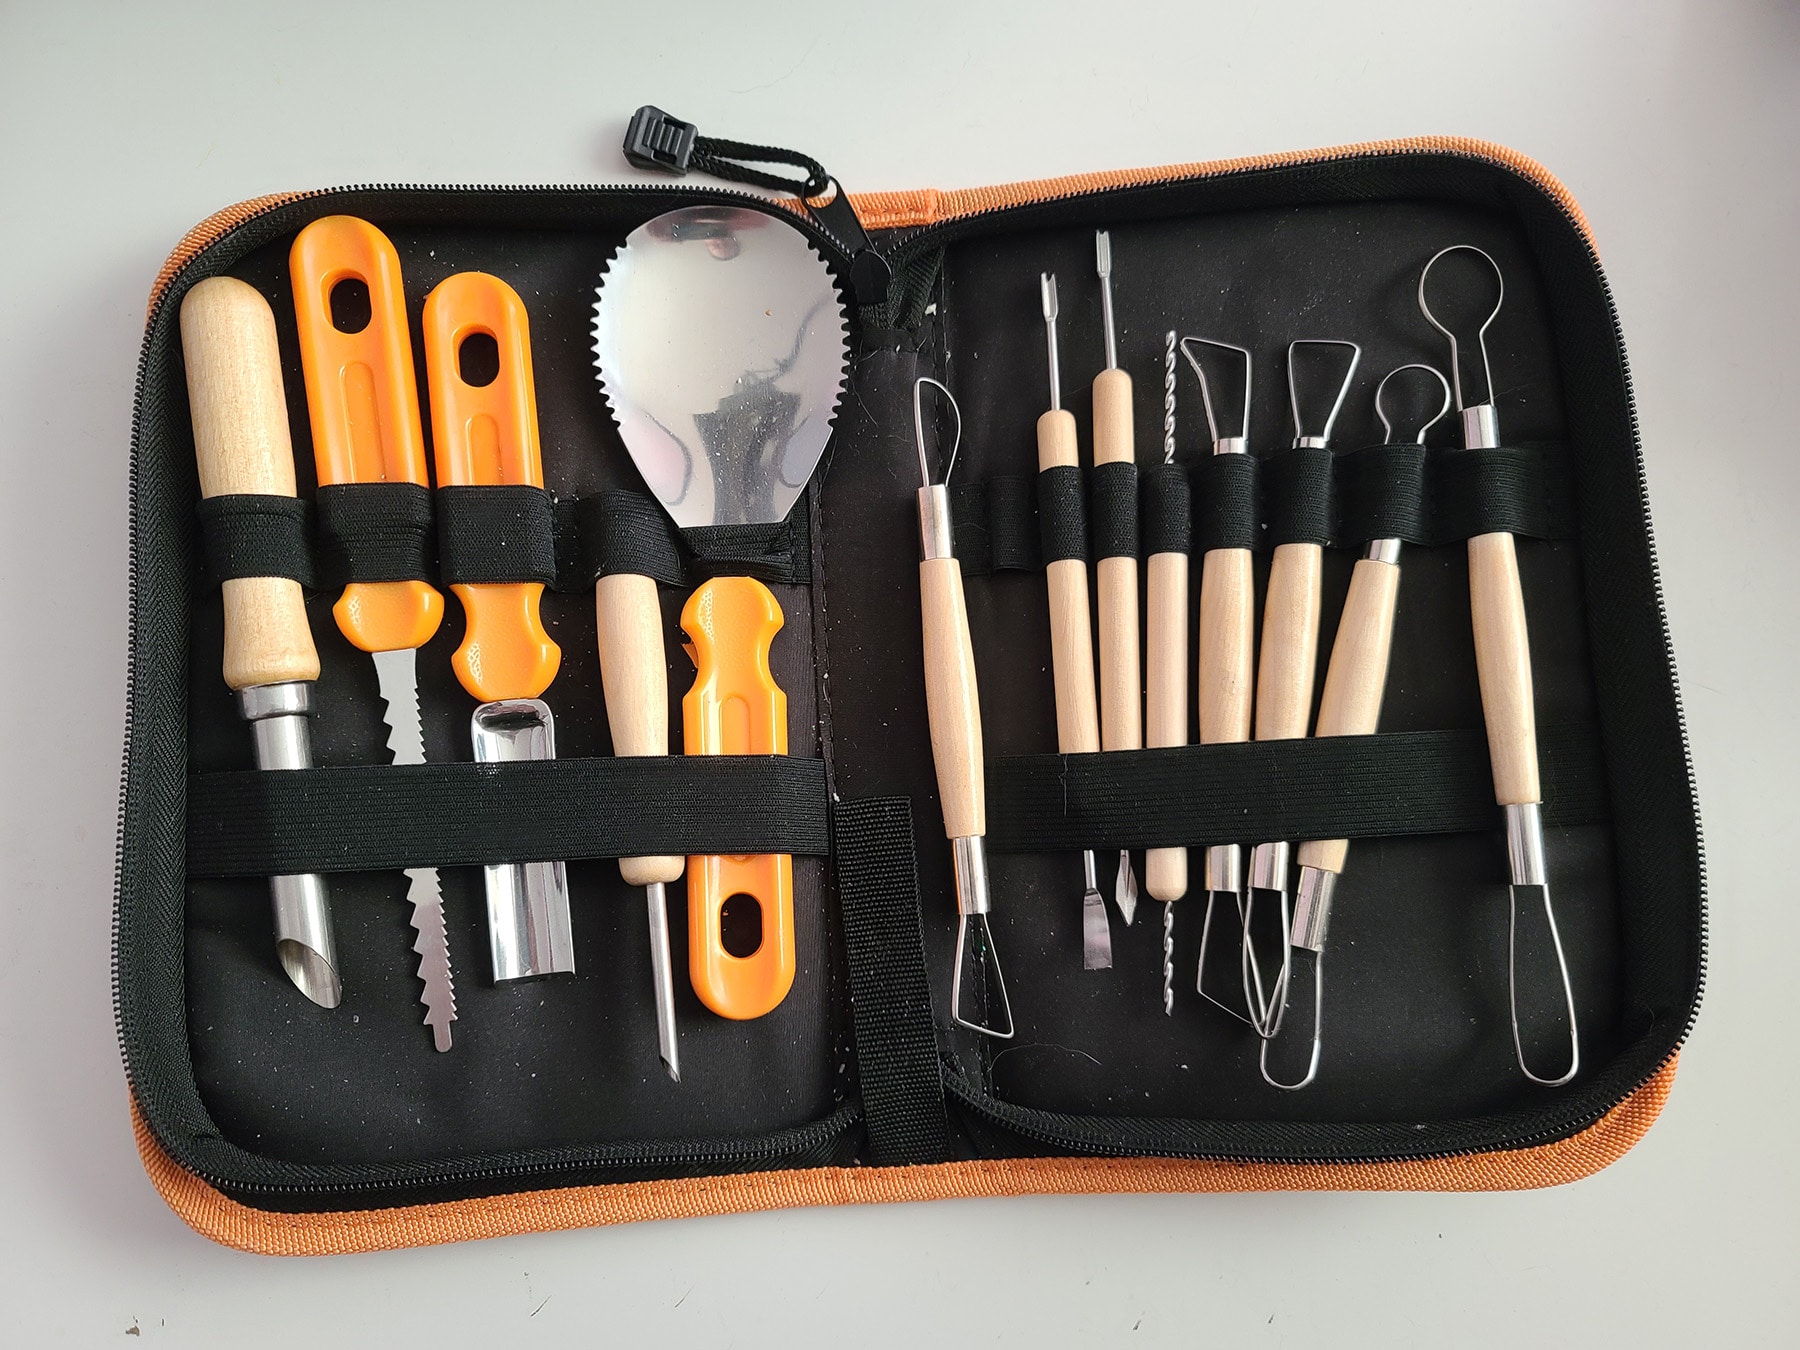 A set of pumpkin carving tools, in a zippered case.